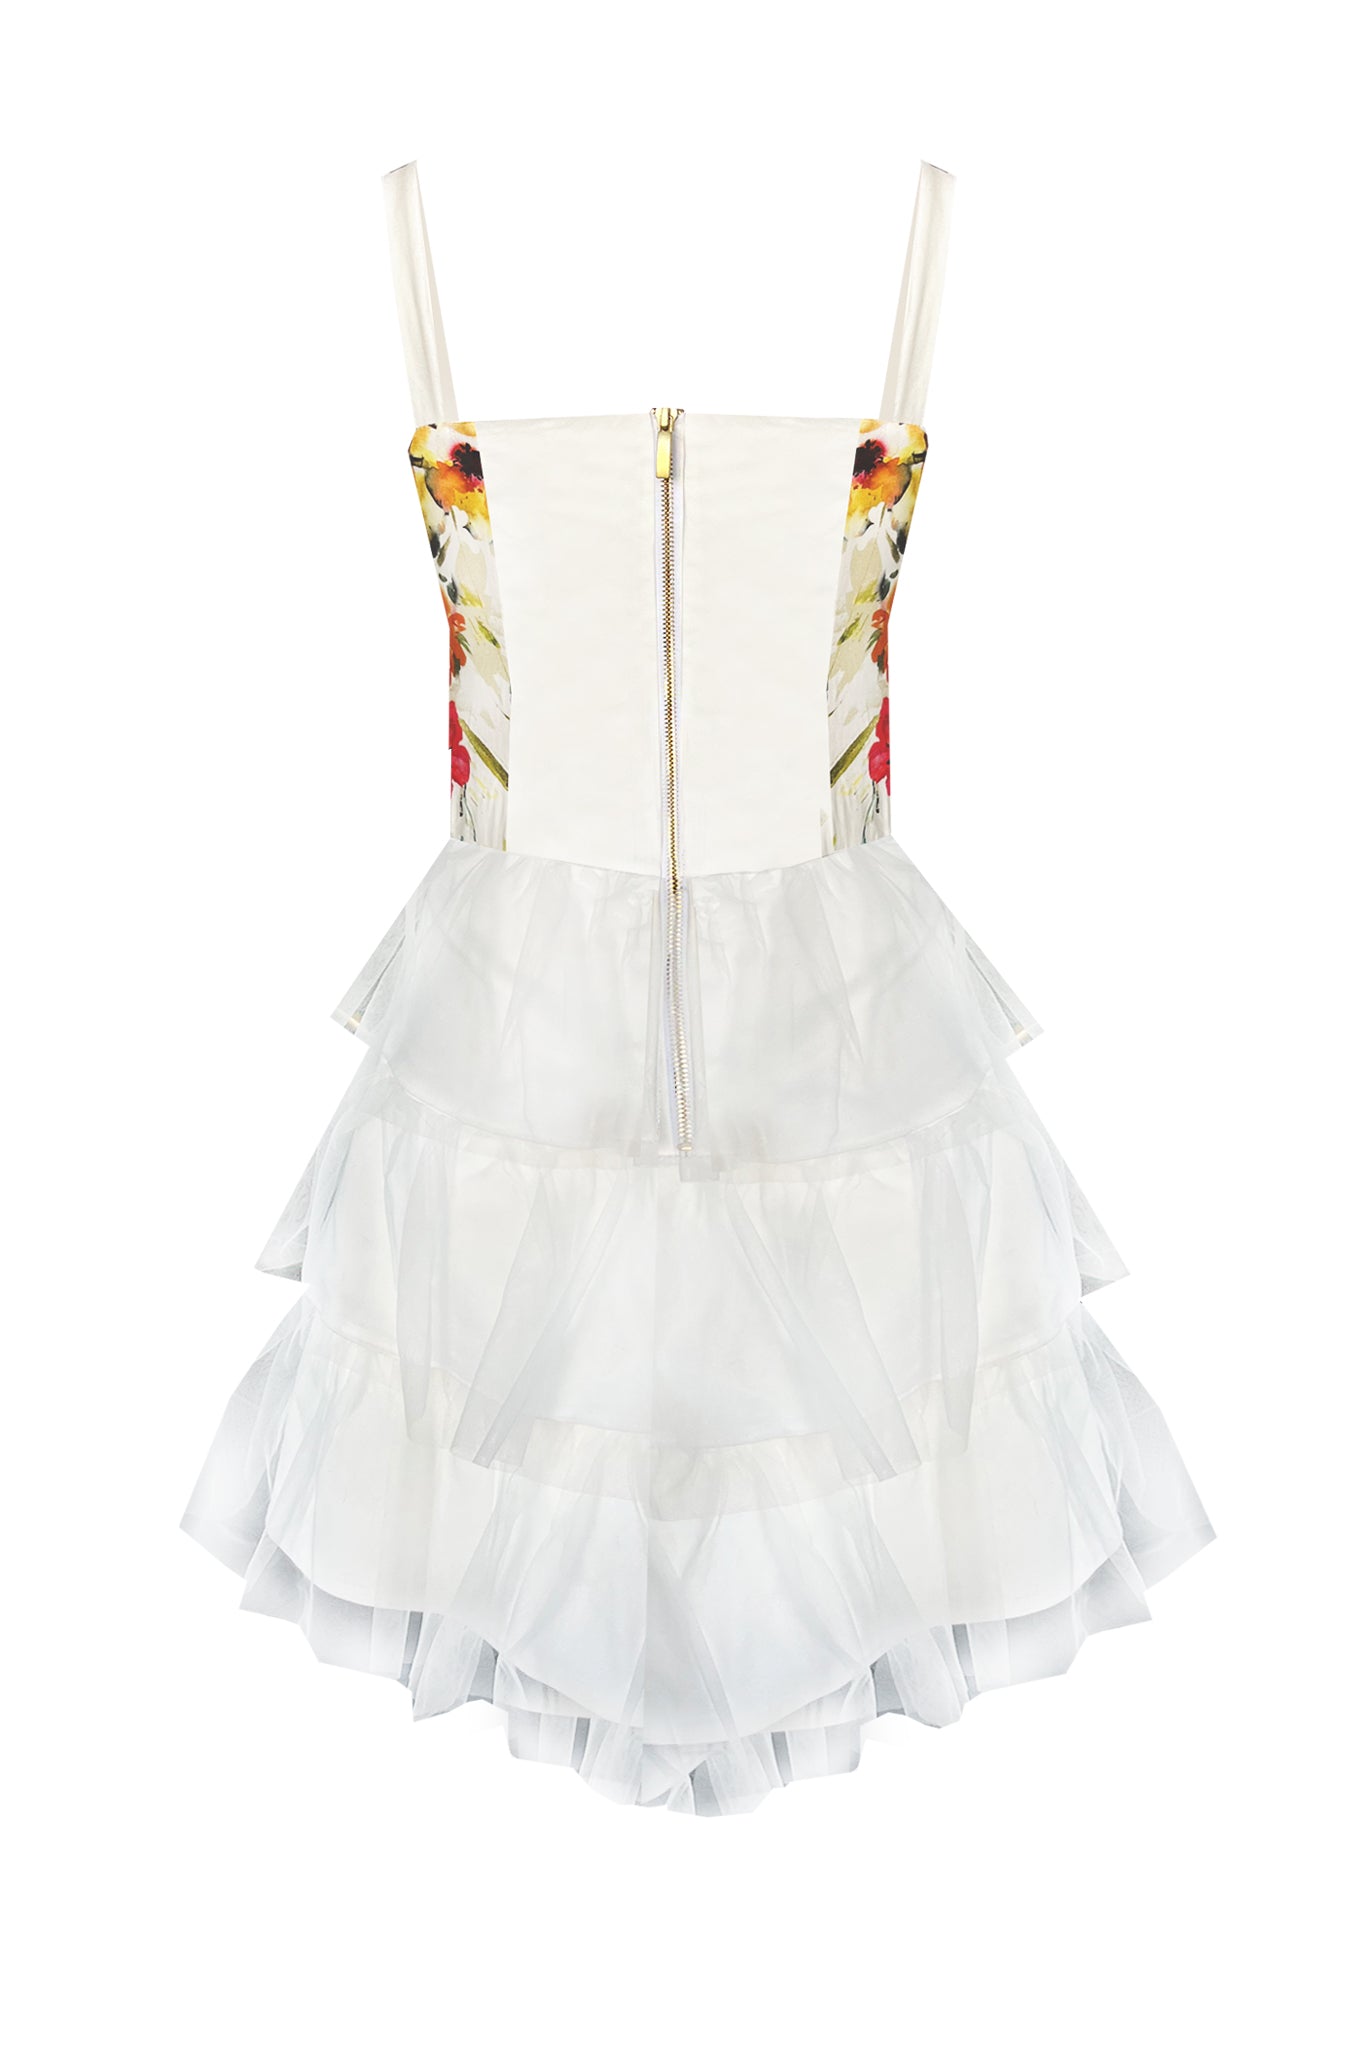 White denim and floral print corset tulle dress